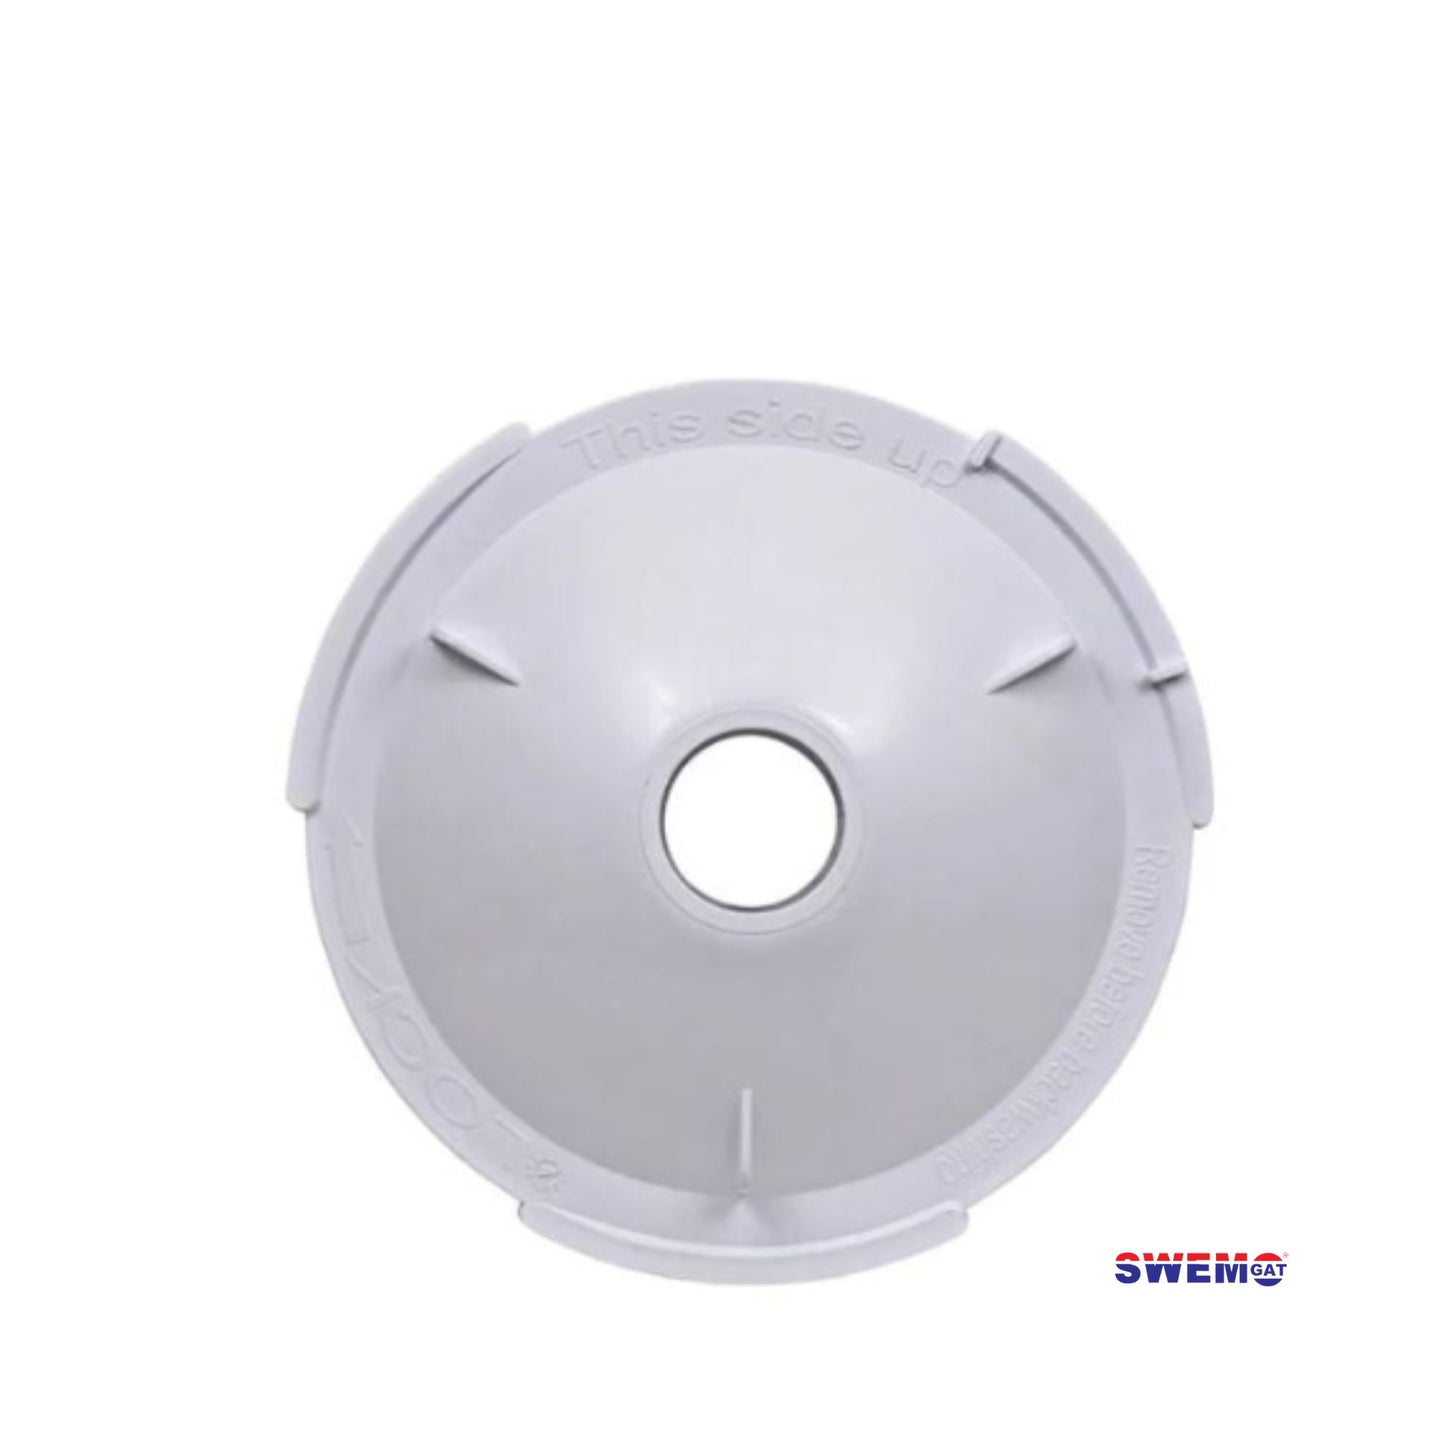 Swimquip Weir vacuum lid | White vac lid with 3 lips to rotate-and-clip into Swimquip weir